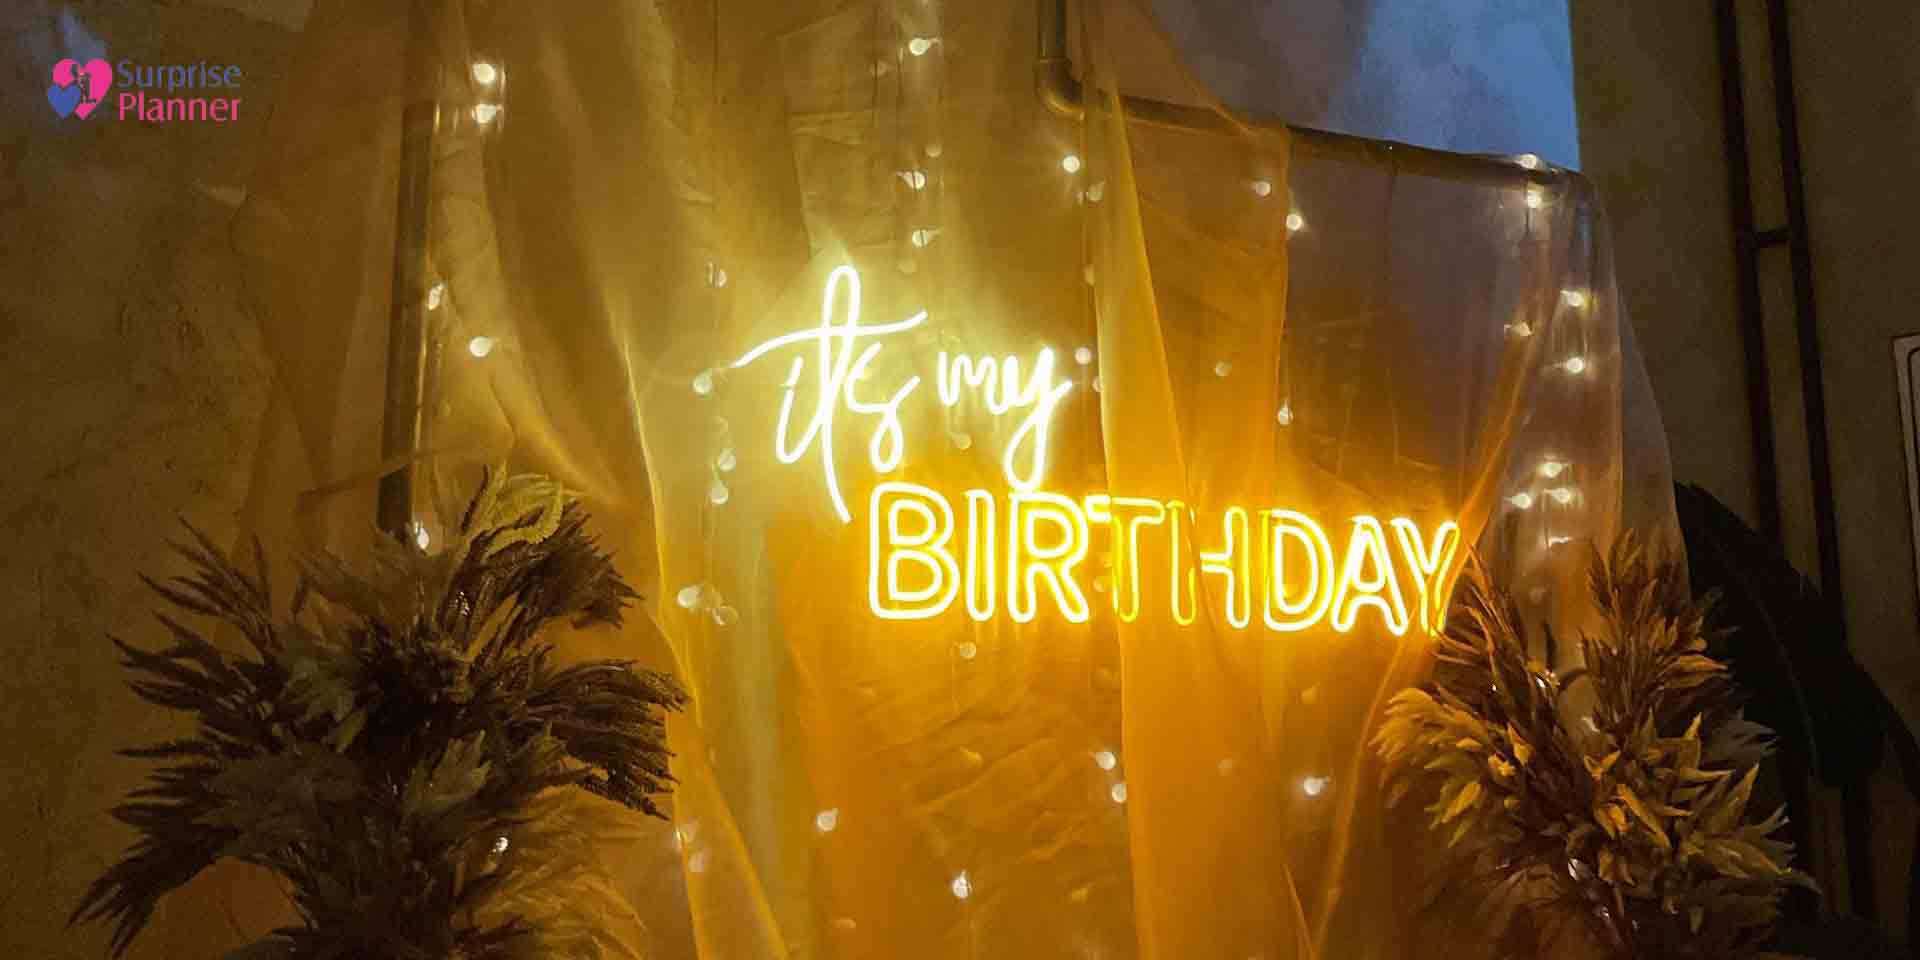 Top 10 Creative Themes Idea to Make Your Birthday Party Special